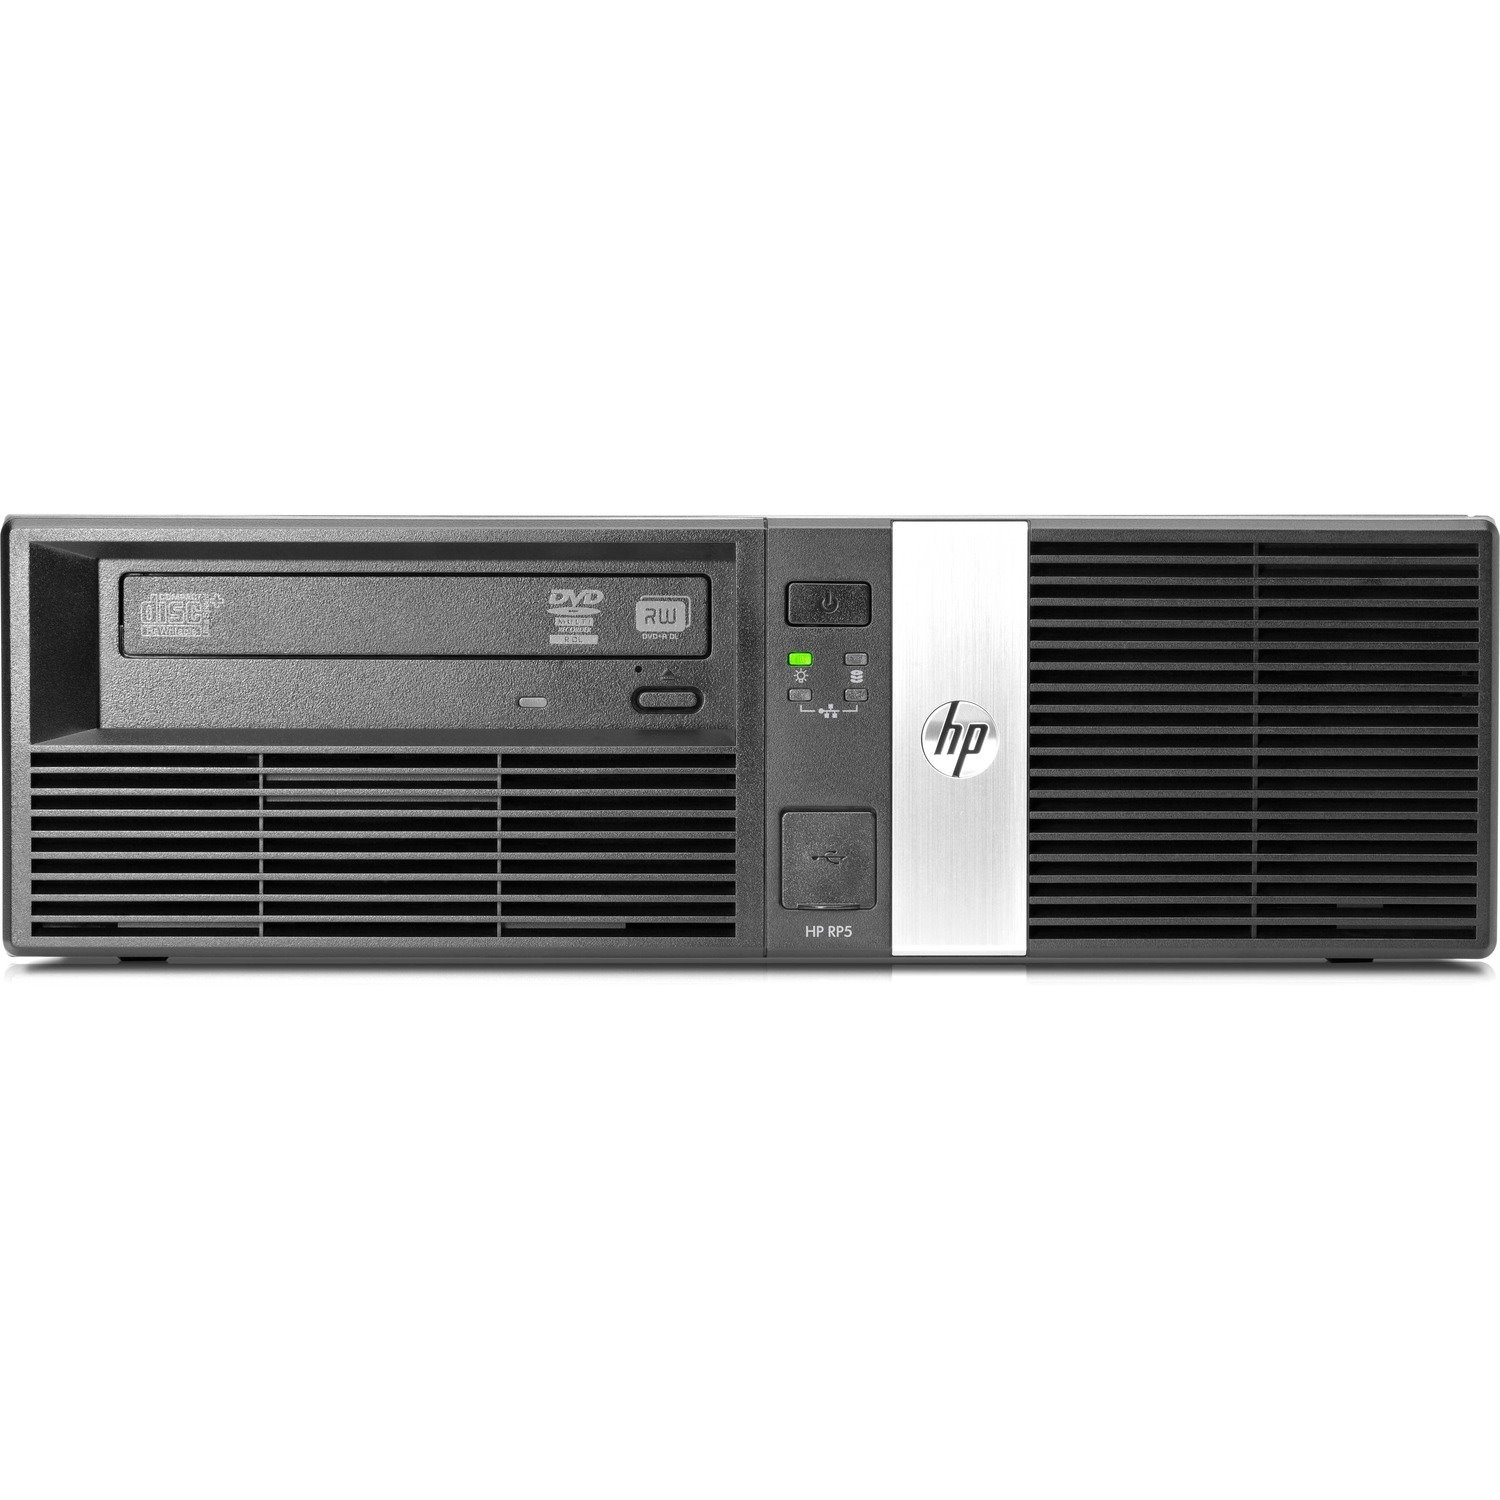 HP RP5 Retail System